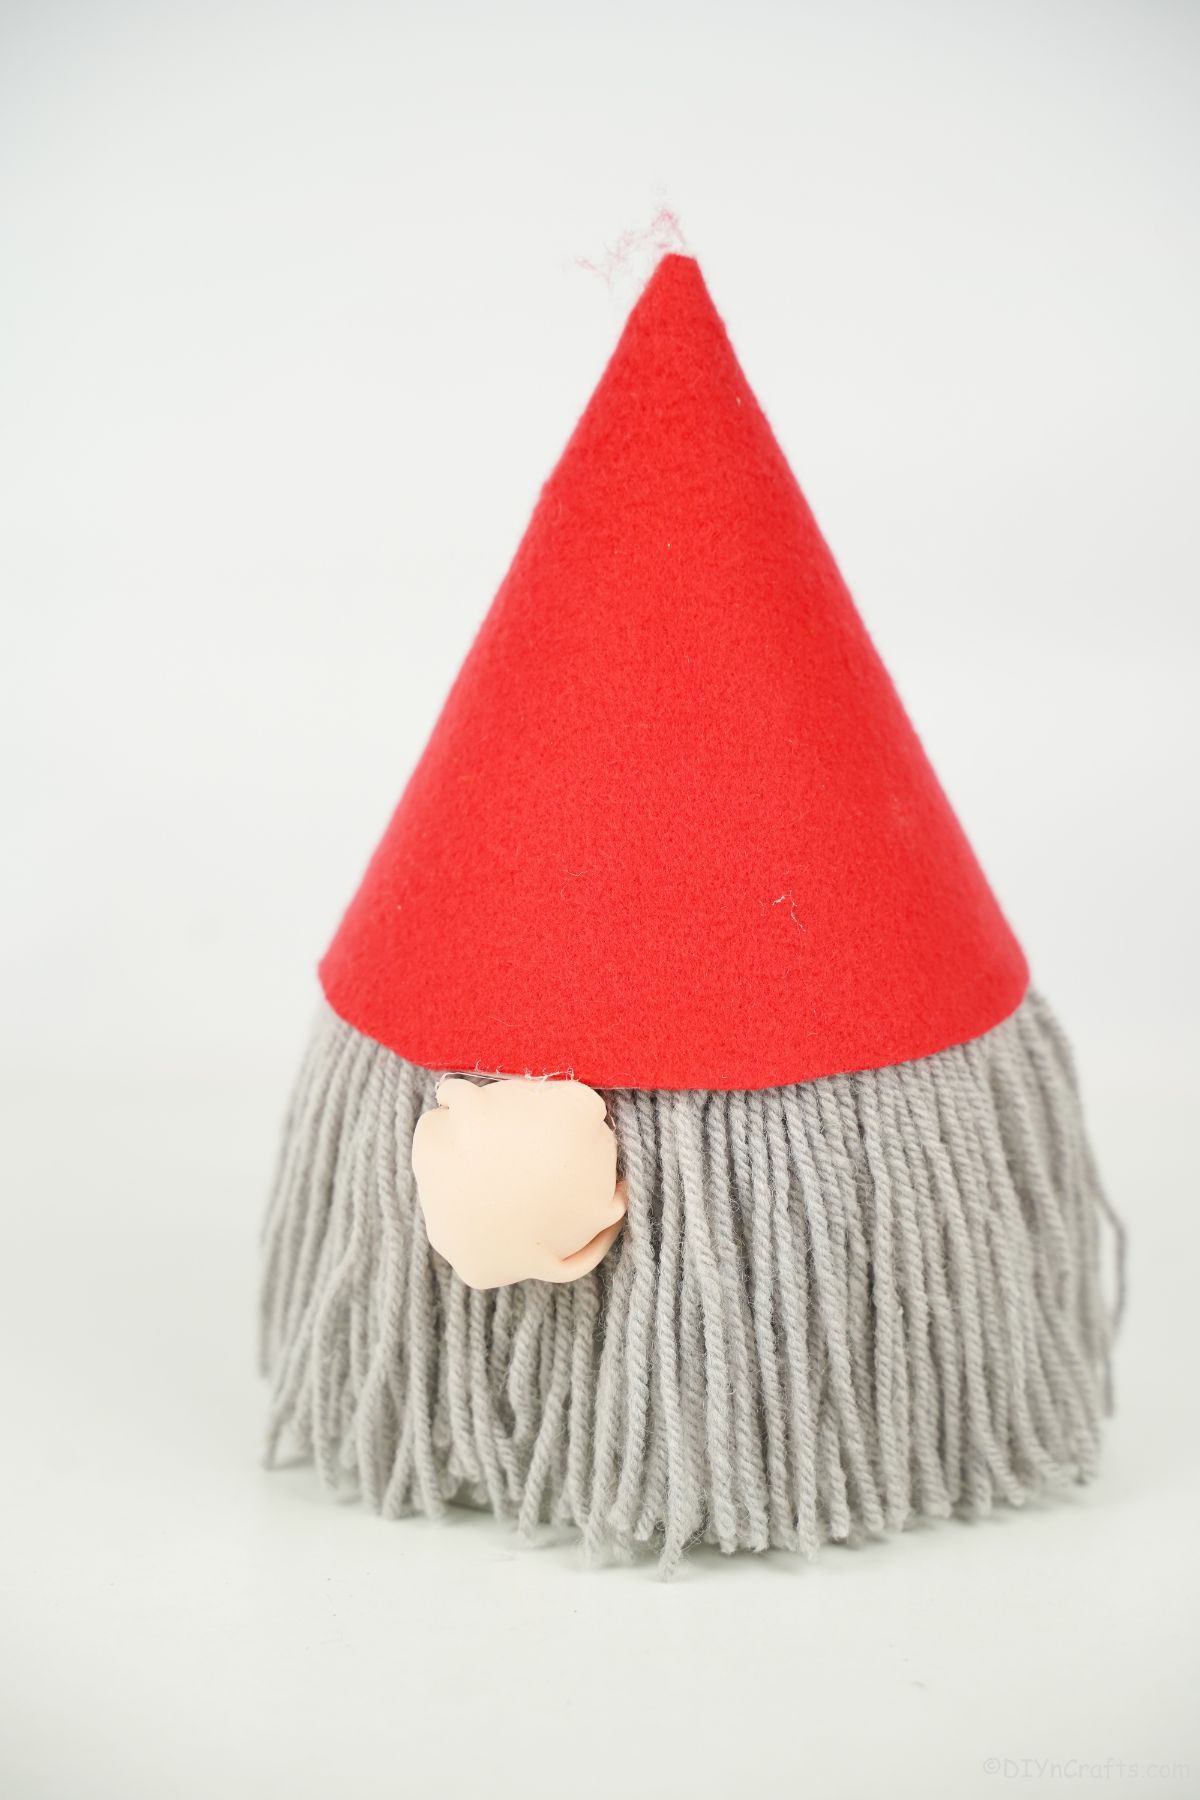 red hat gray beard on gnome on white surface